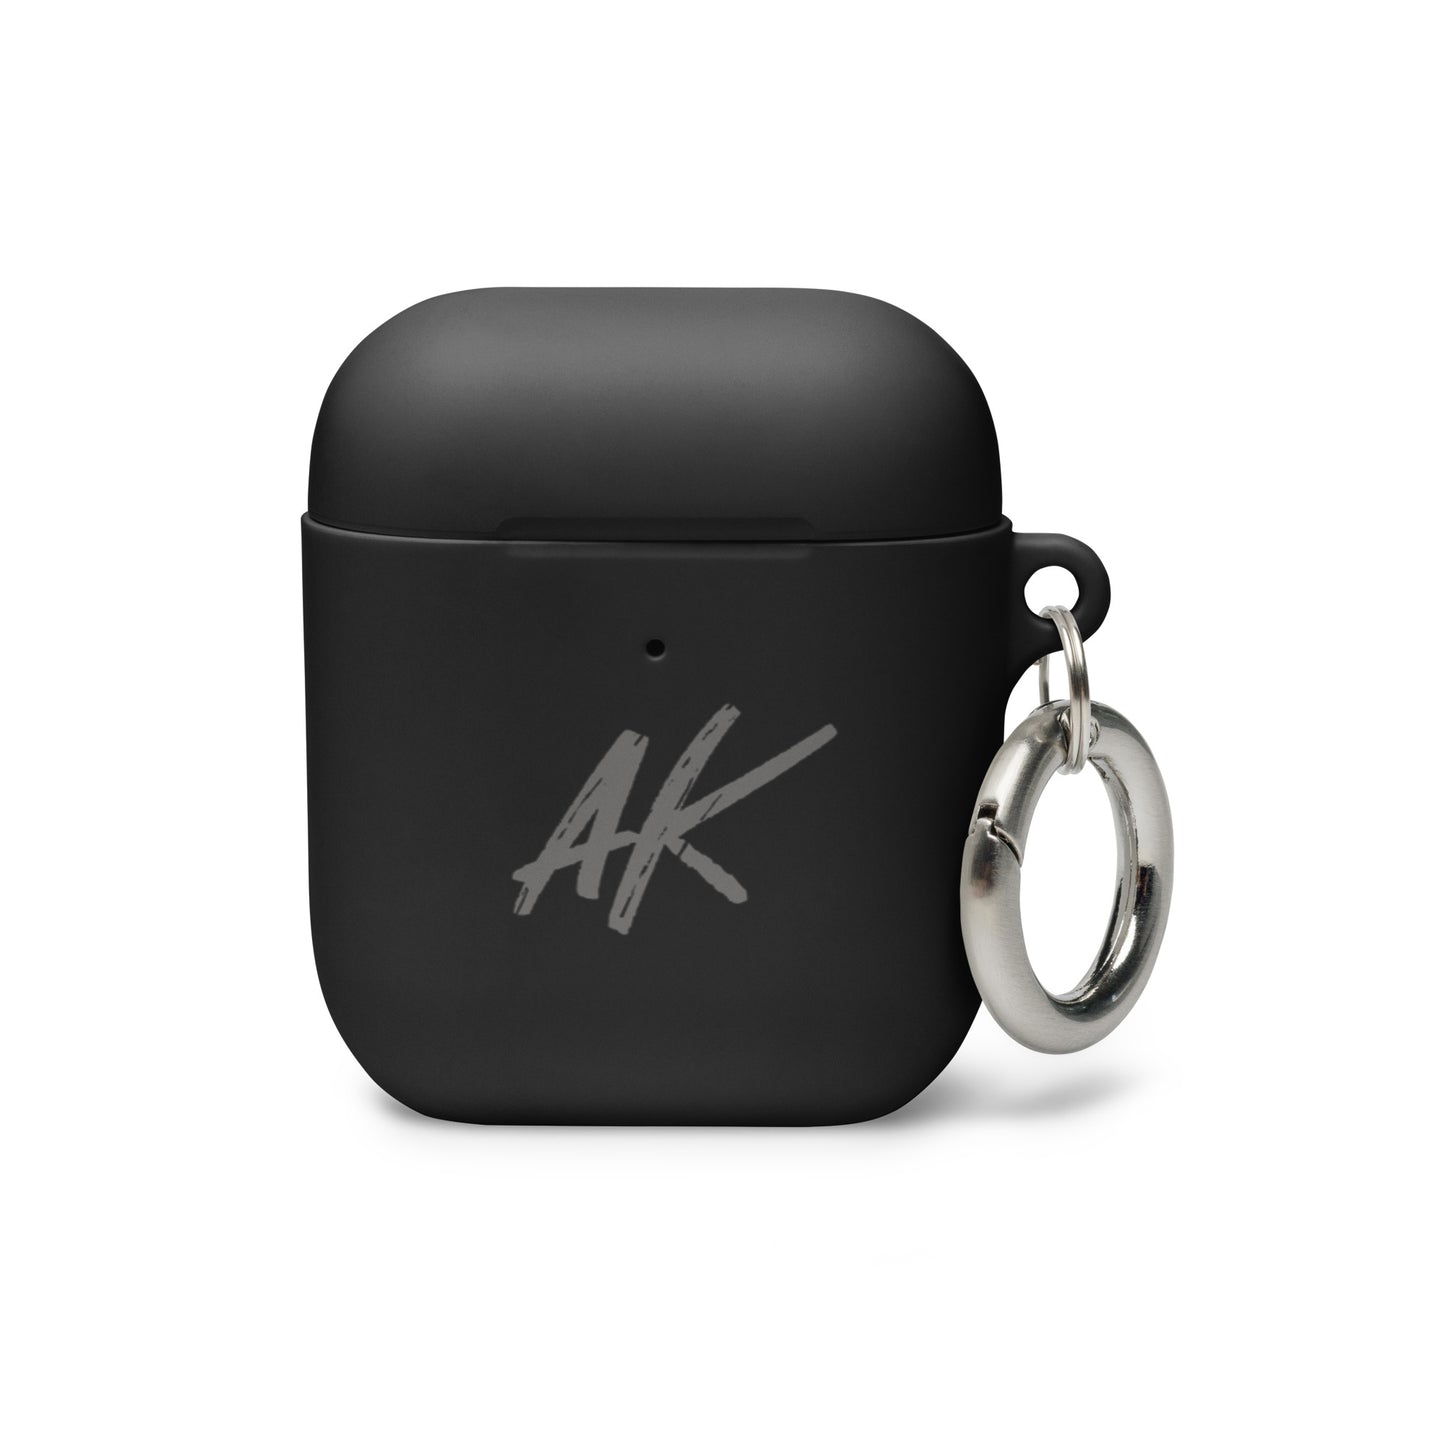 AK Rubber Case for AirPods (grey)